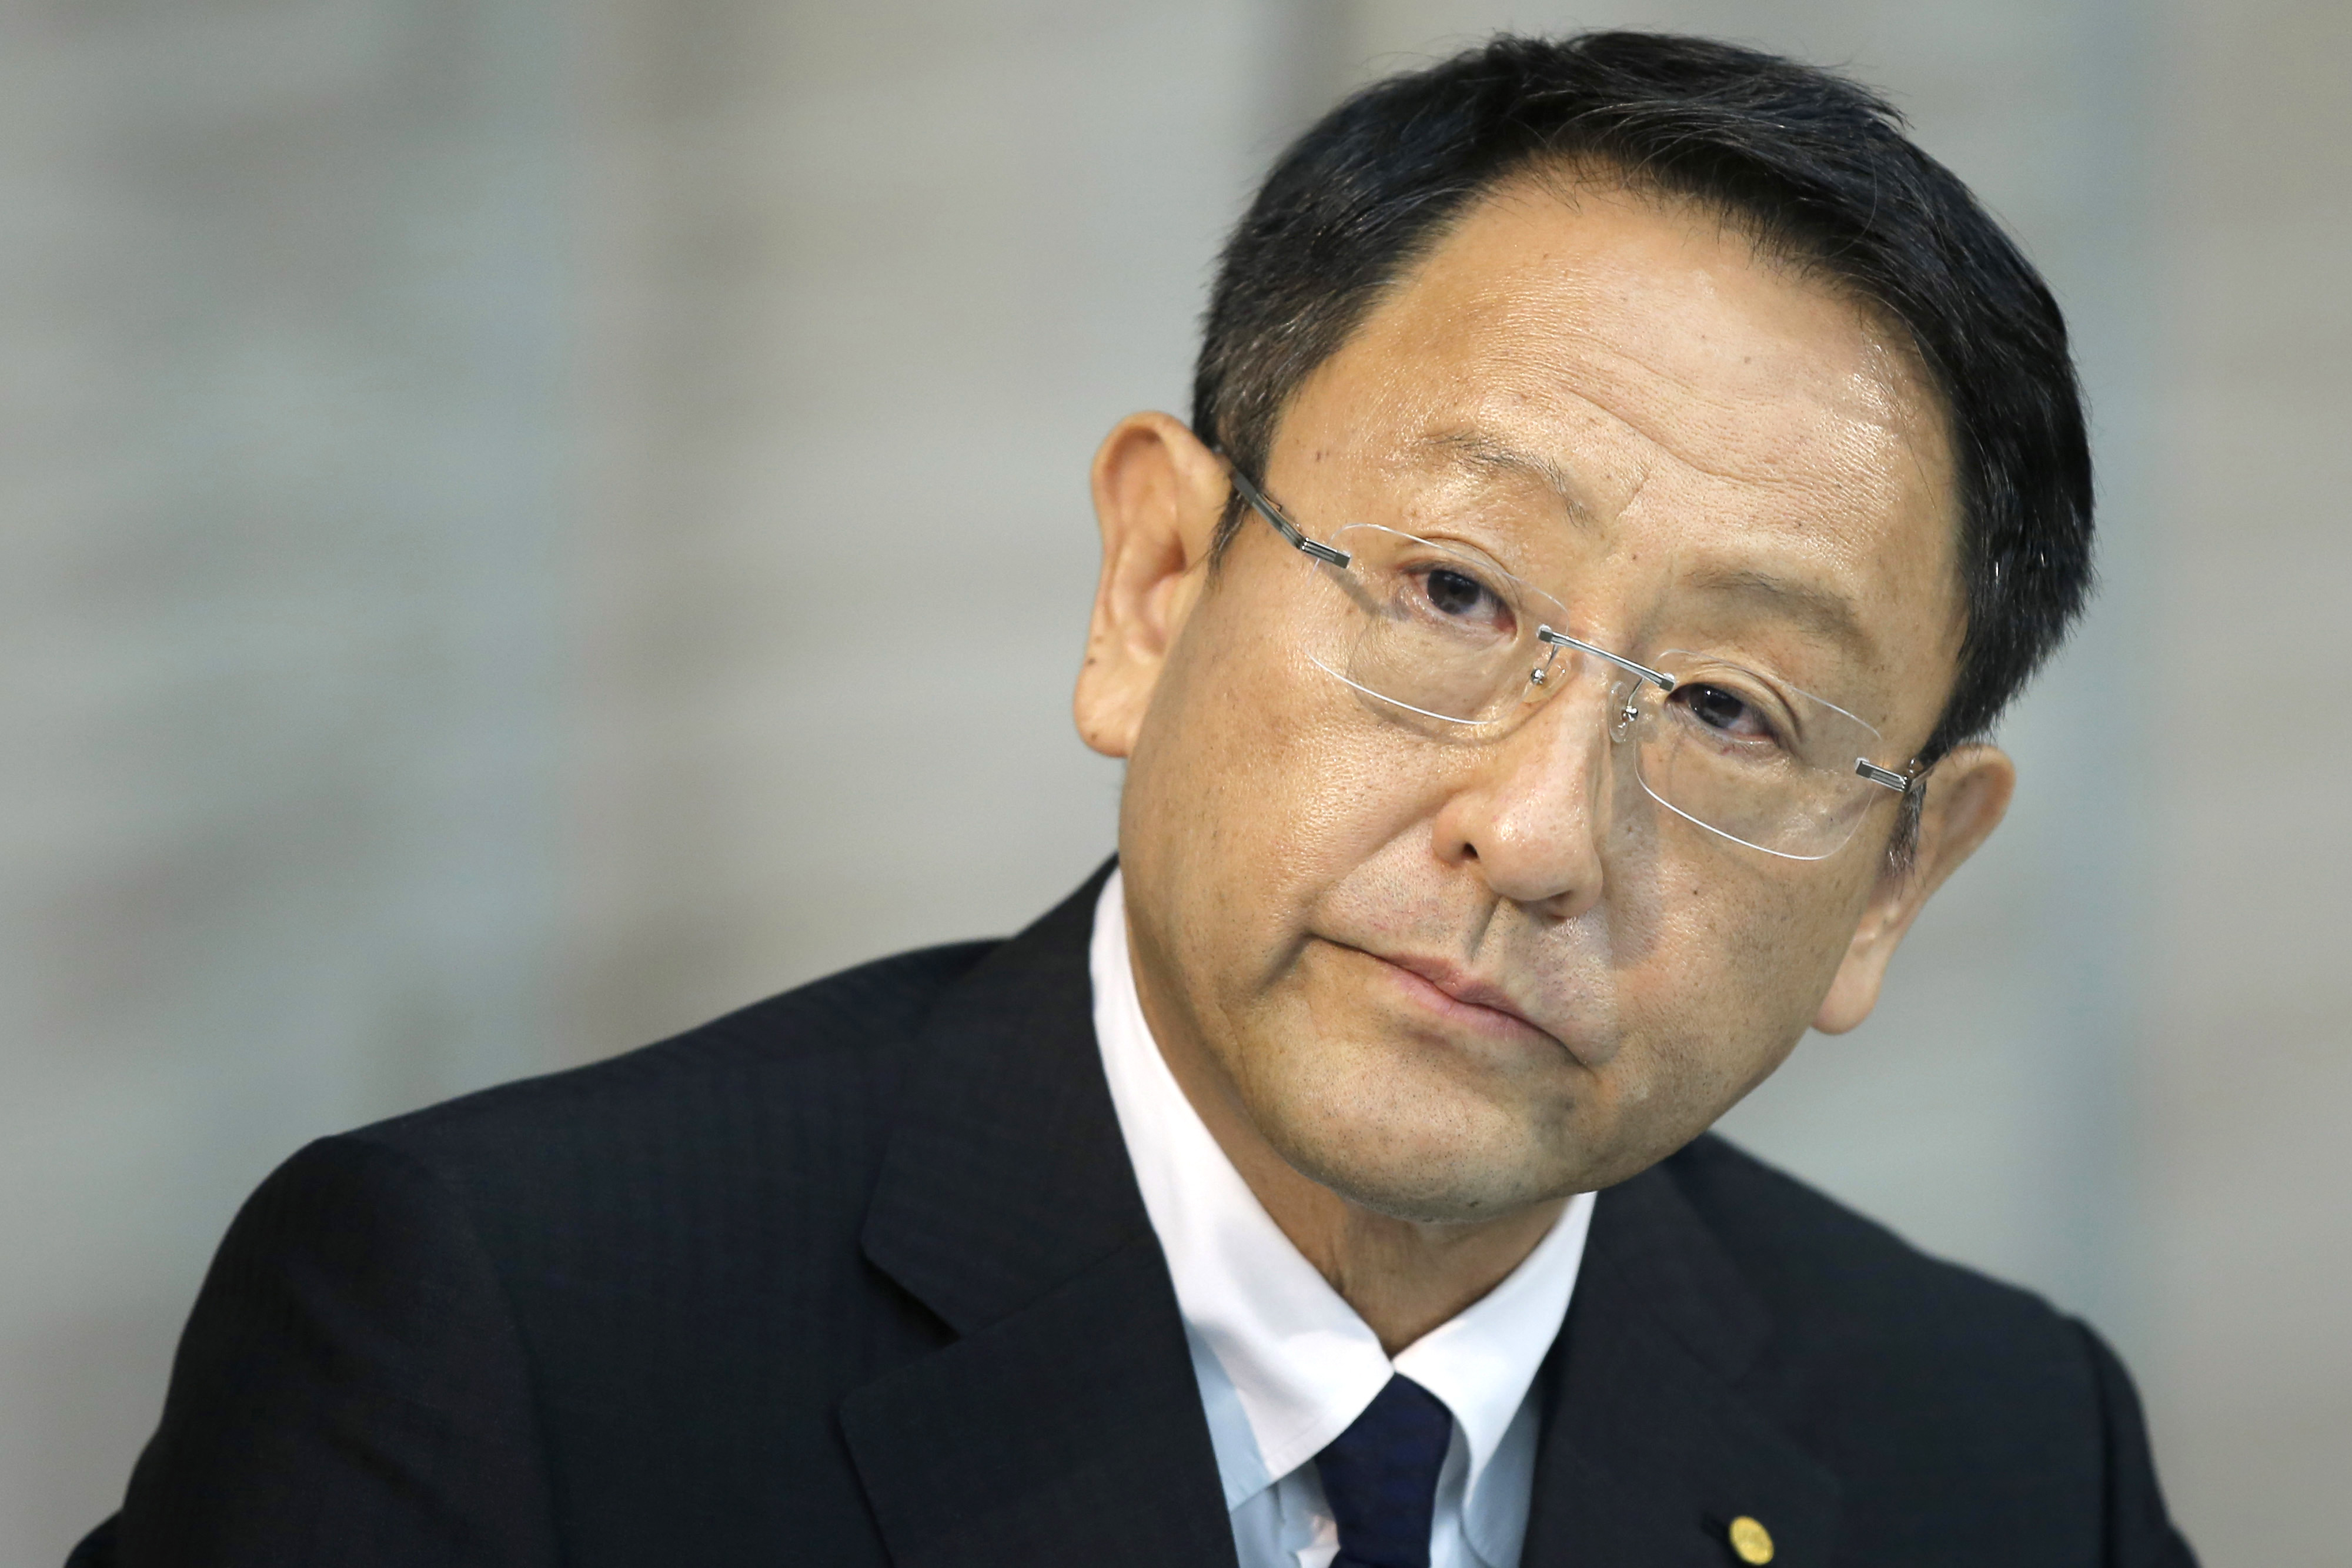 Akio Toyoda, president of Toyota Motor Corp., listens at a news conference in Tokyo on June 19 at which he expressed support for communications director Julie Hamp following her arrest. | BLOOMBERG